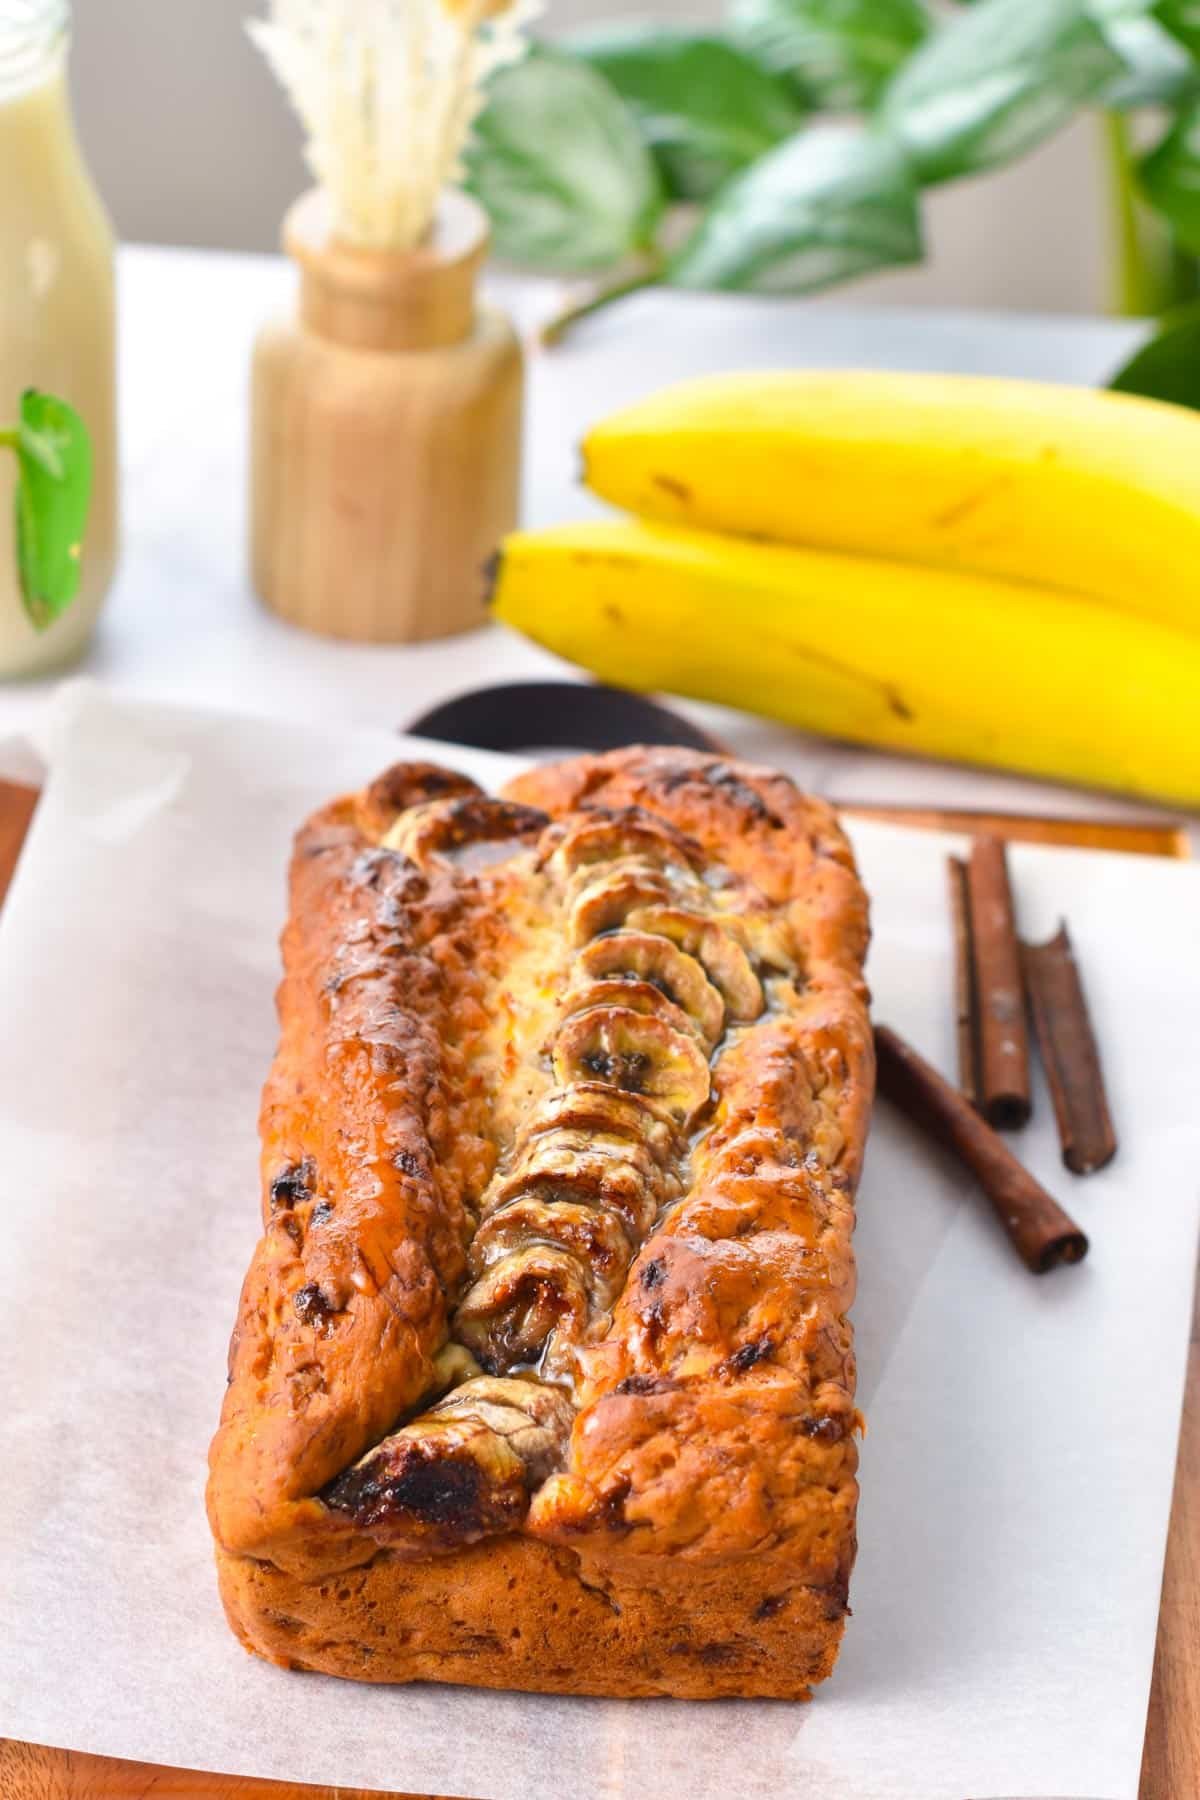 A banana bread on a chopping board with banana slices on top.